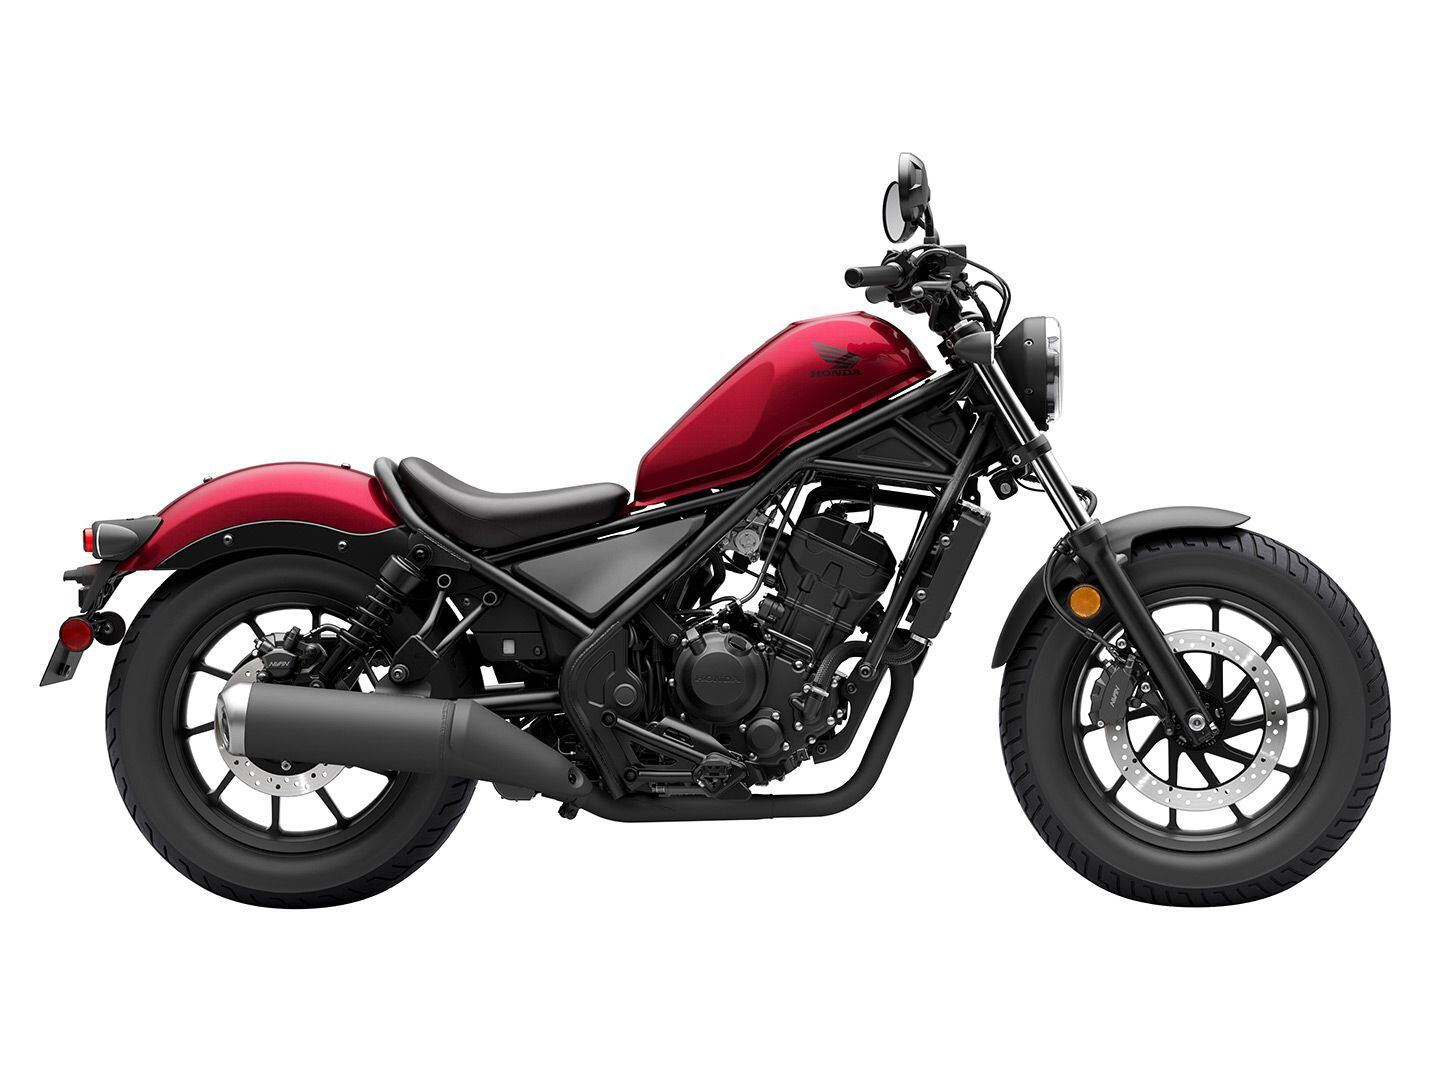 The Rebel 300 is a bestselling entry-level cruiser from Honda for good reason.